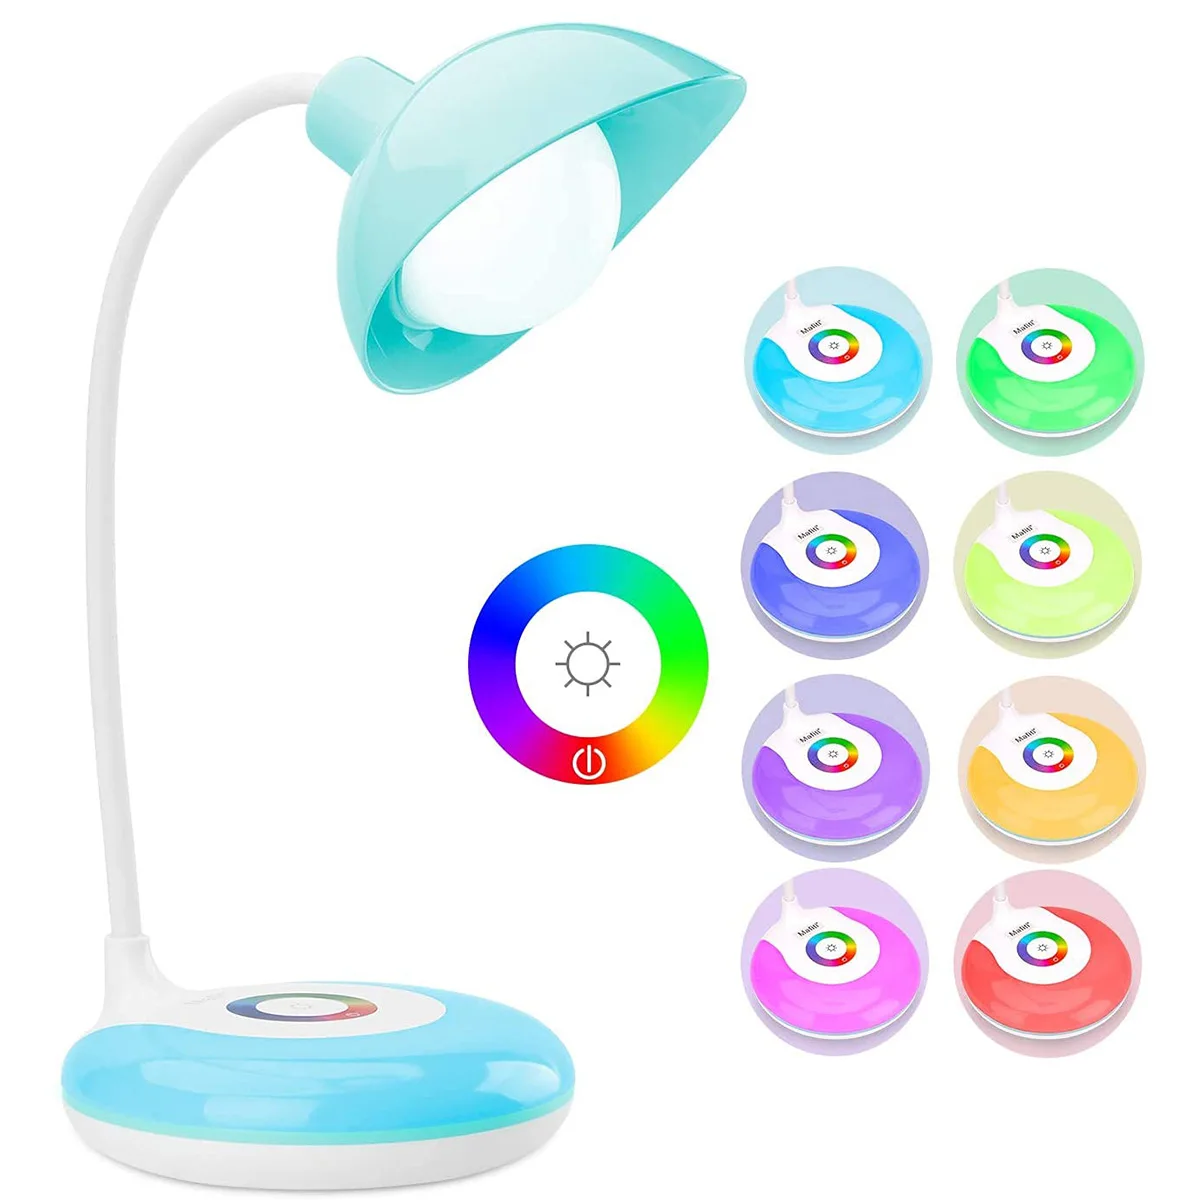 LED Children Table Lamp,Dimmable Eye-Caring USB Rechargeable,RGB Base Touch Control, Reading Night Kids Christmas Birthday Gift